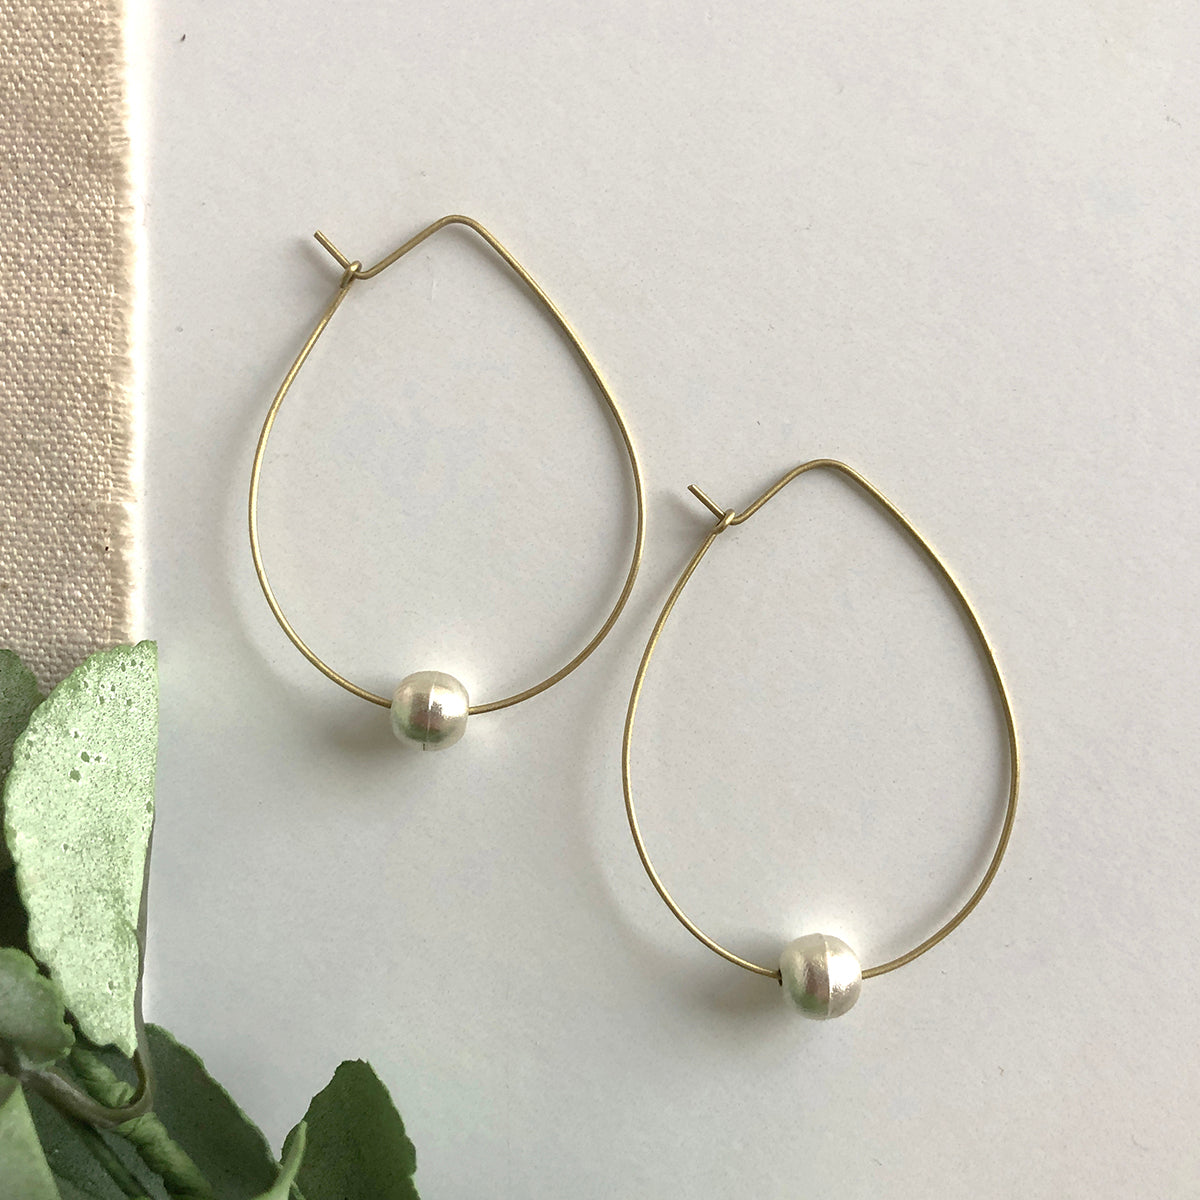 Angelco Accessories Floating pearl hoop earrings - on white flatlay with linen and green leaves